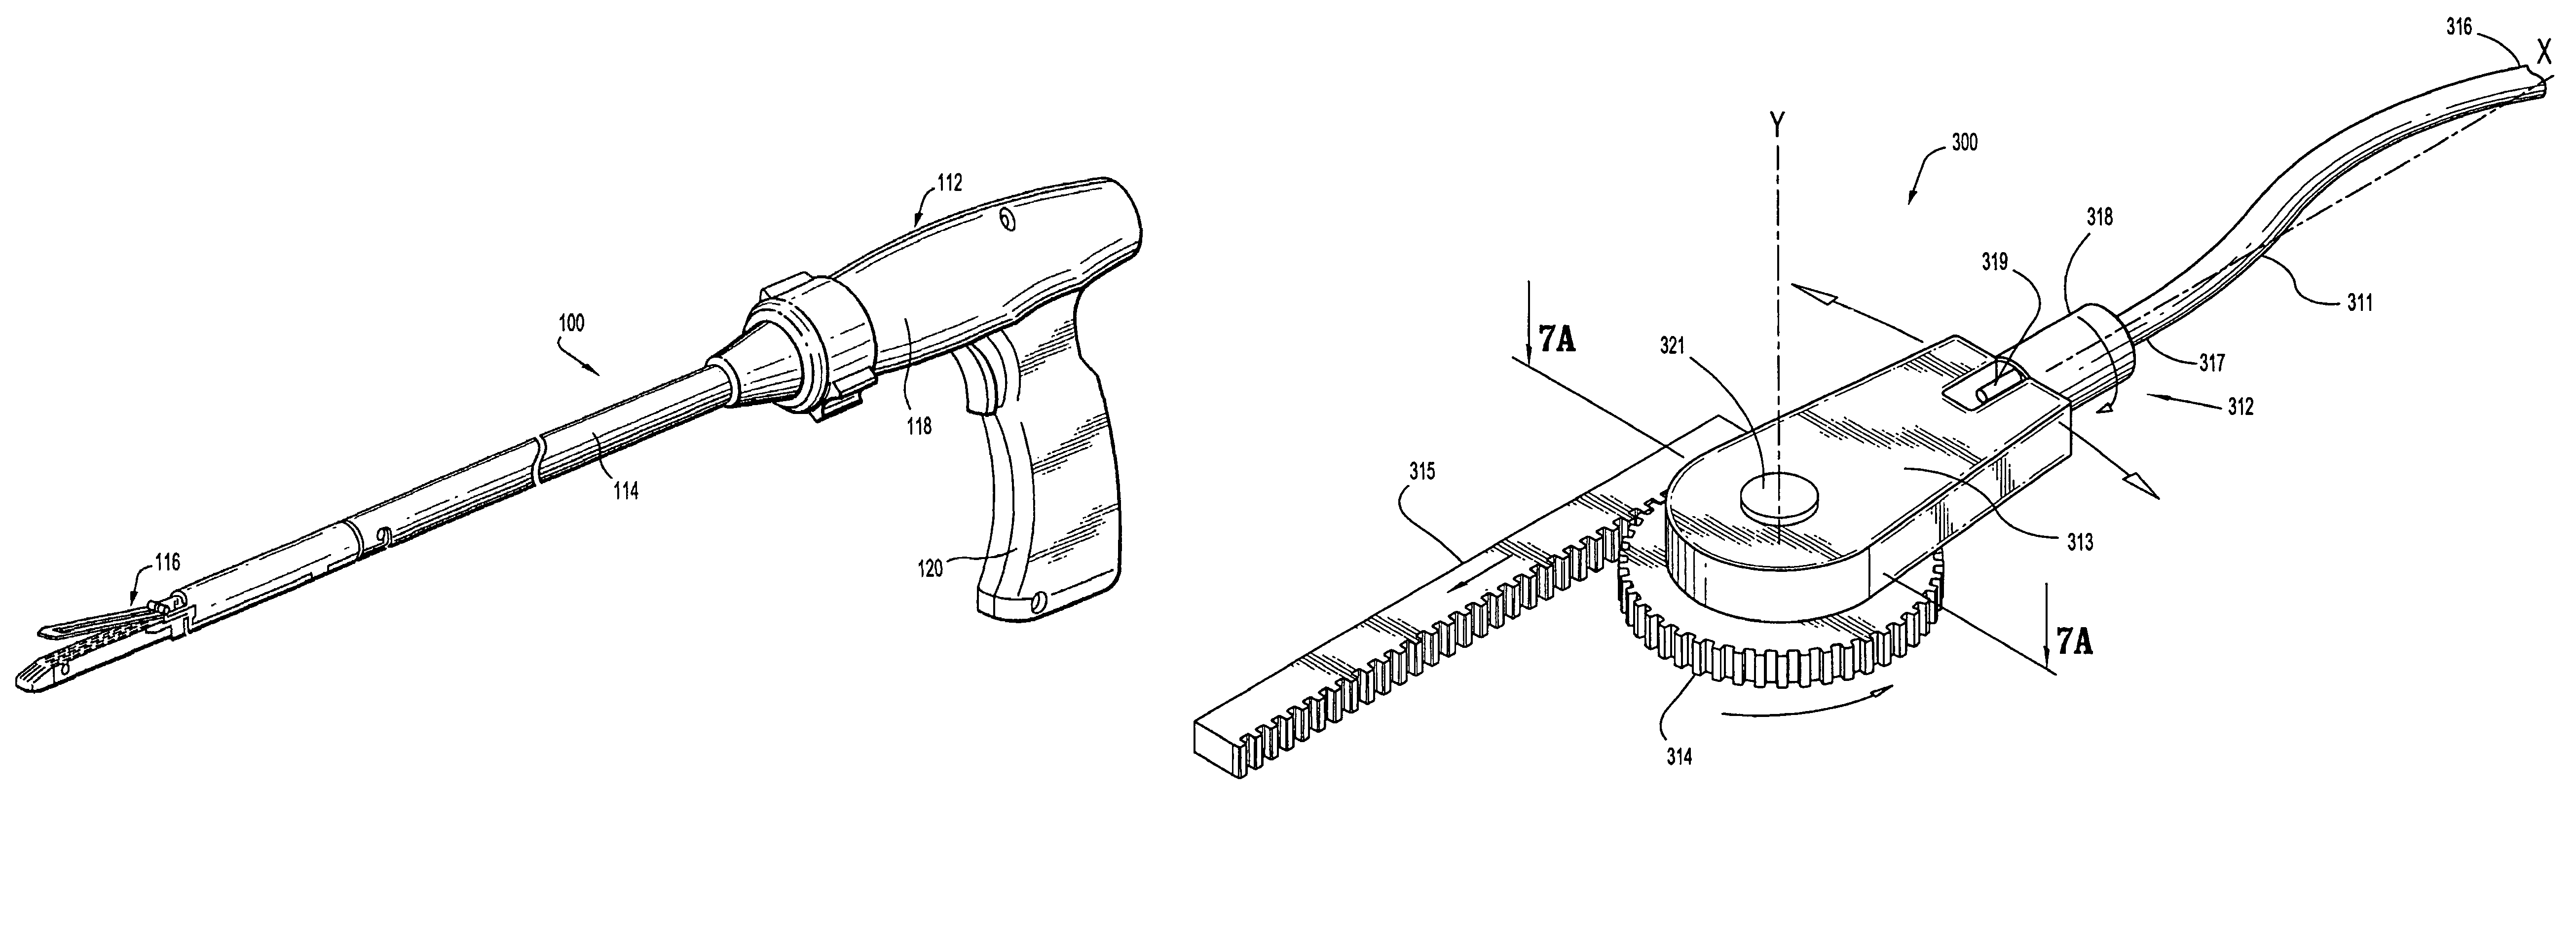 Surgical instrument with flexible drive mechanism